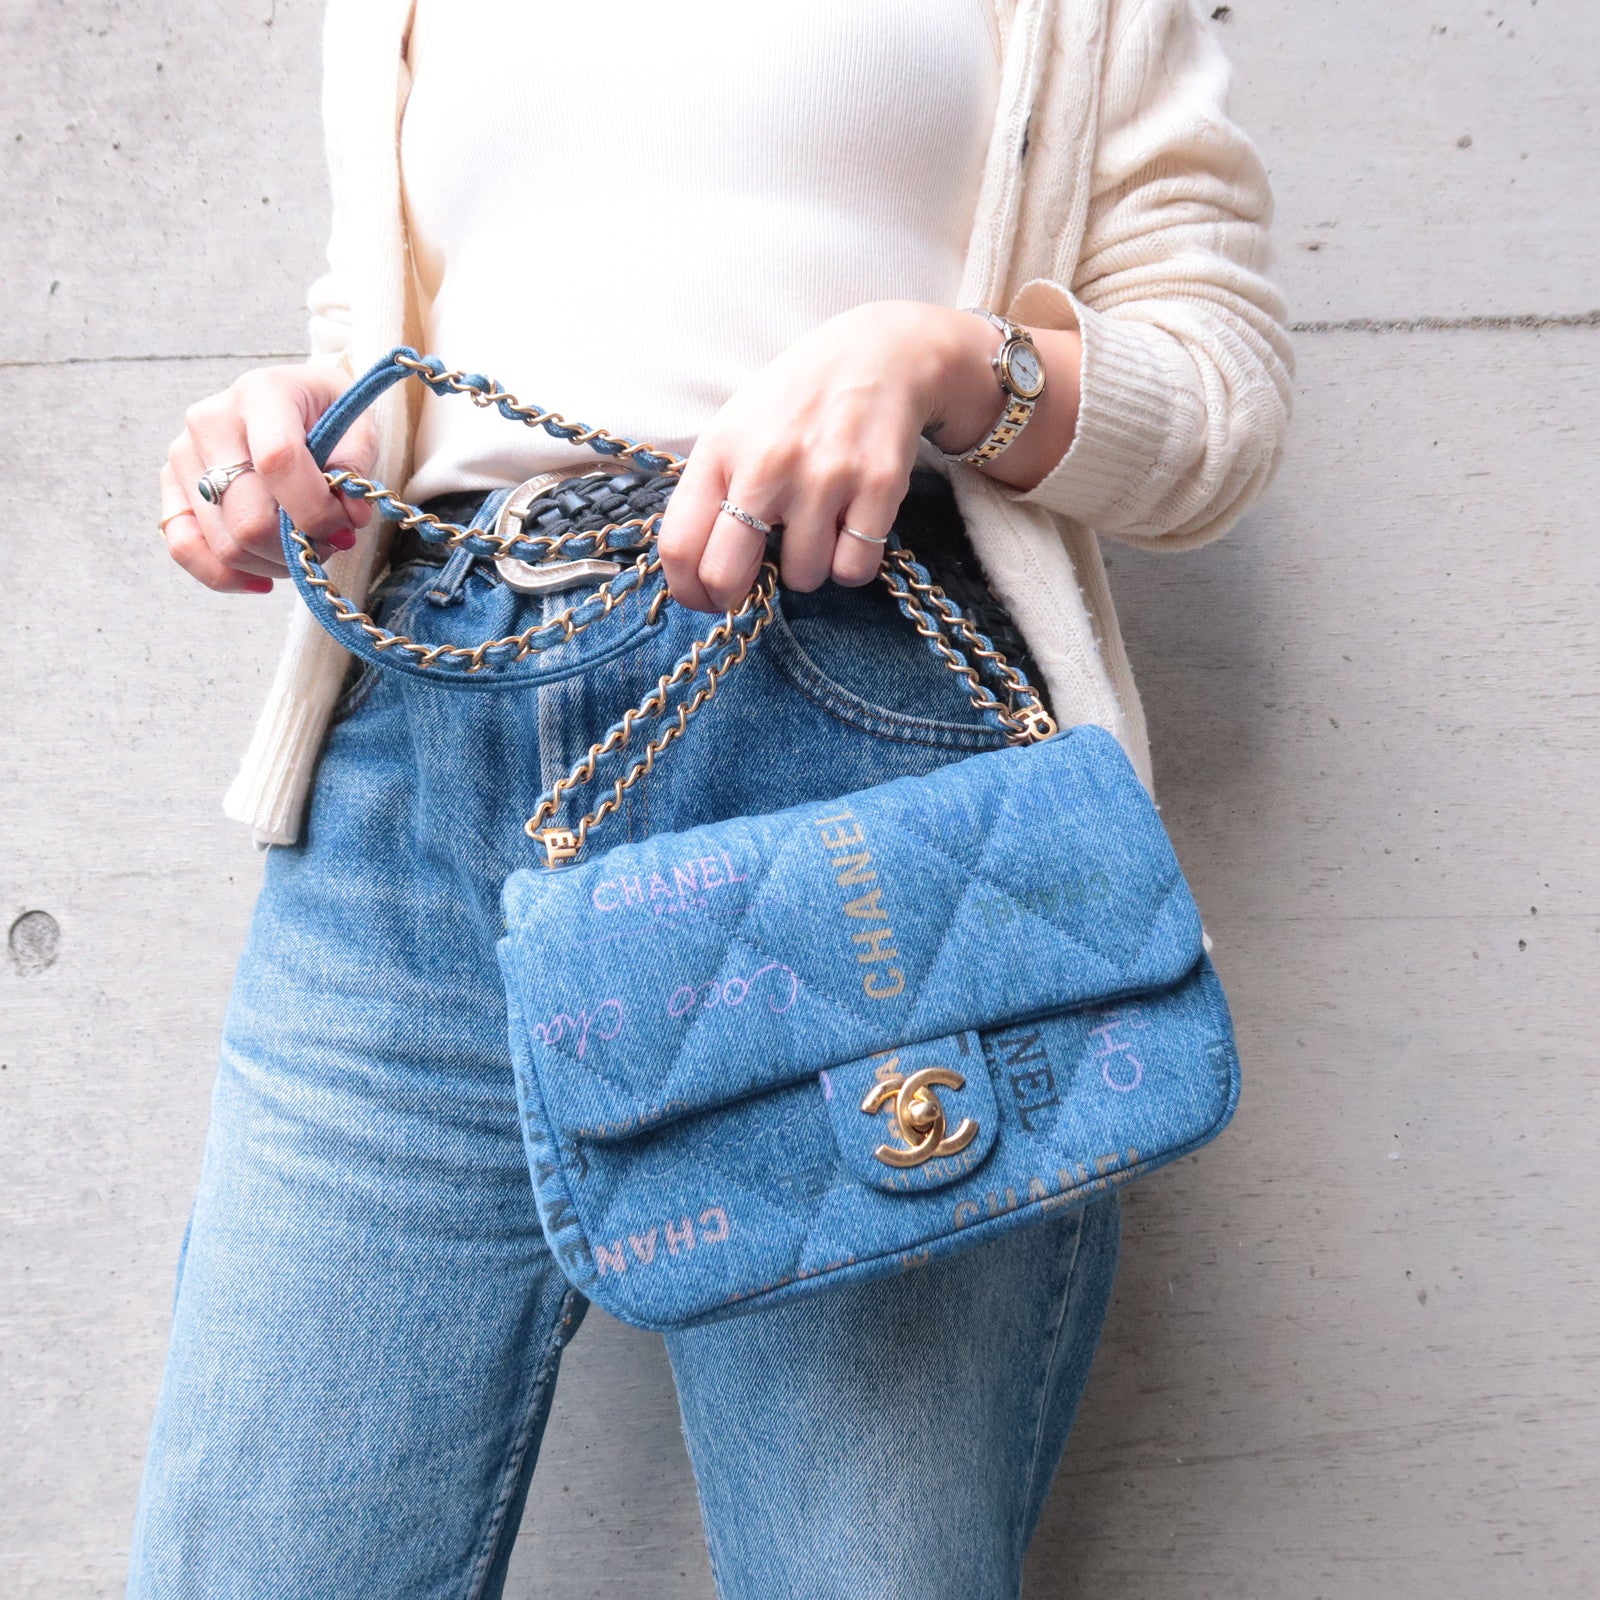 Crossbody Small Lee Blue Jeans Bag, Recycled Denim Zippered Small Bag,  Messenger Blue Jeans Bag, Crossbody Teens Denim Jeans Bag Europe - Etsy |  Recycled denim, Jeans bag, Denim bag diy